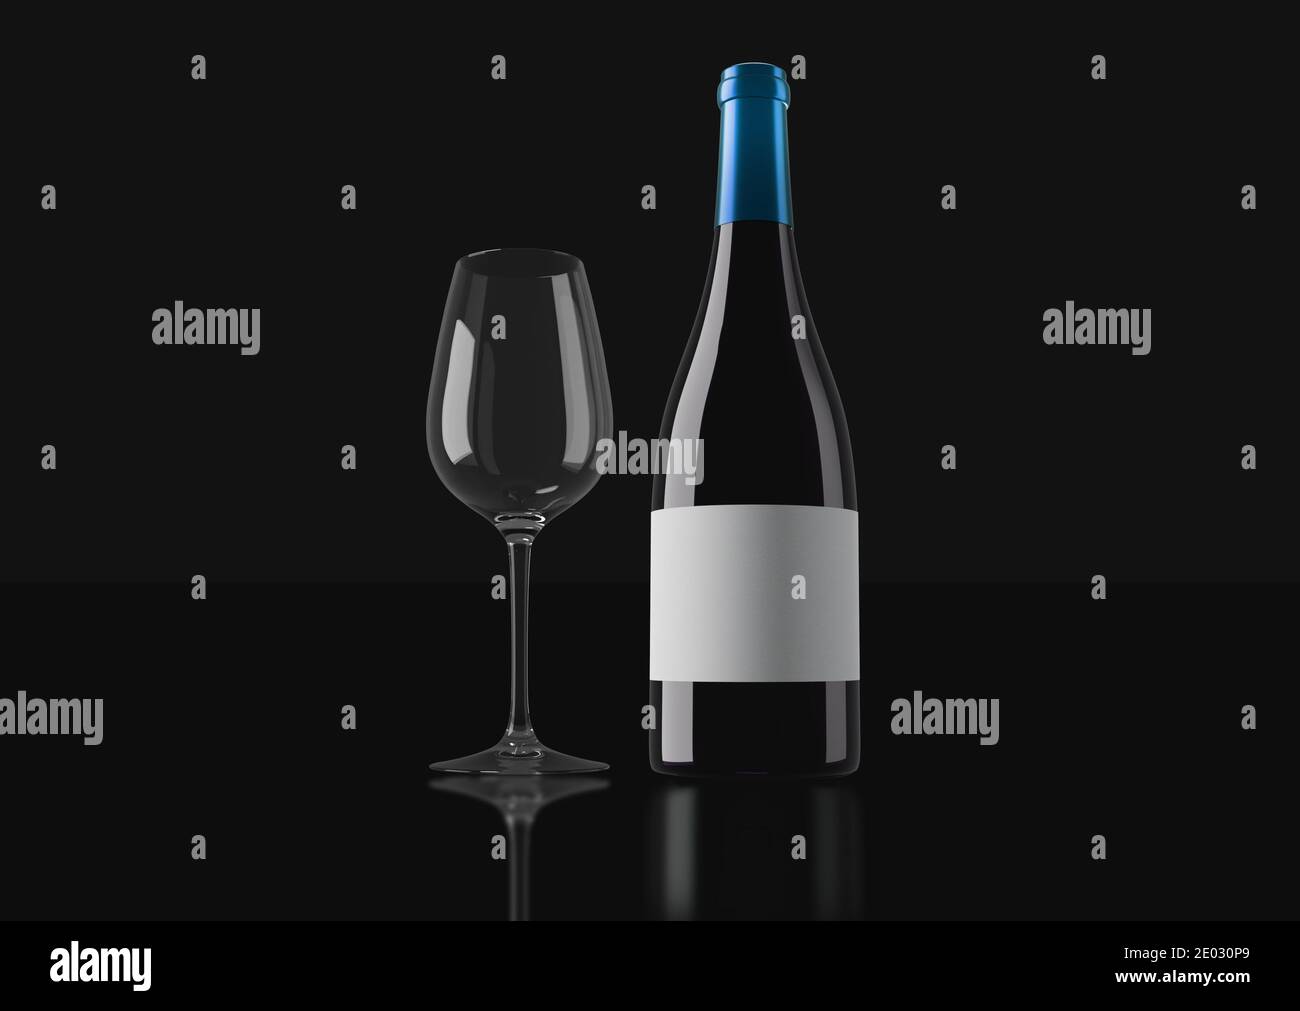 Bottle of red wine and a glass cup in a dark background Stock Photo